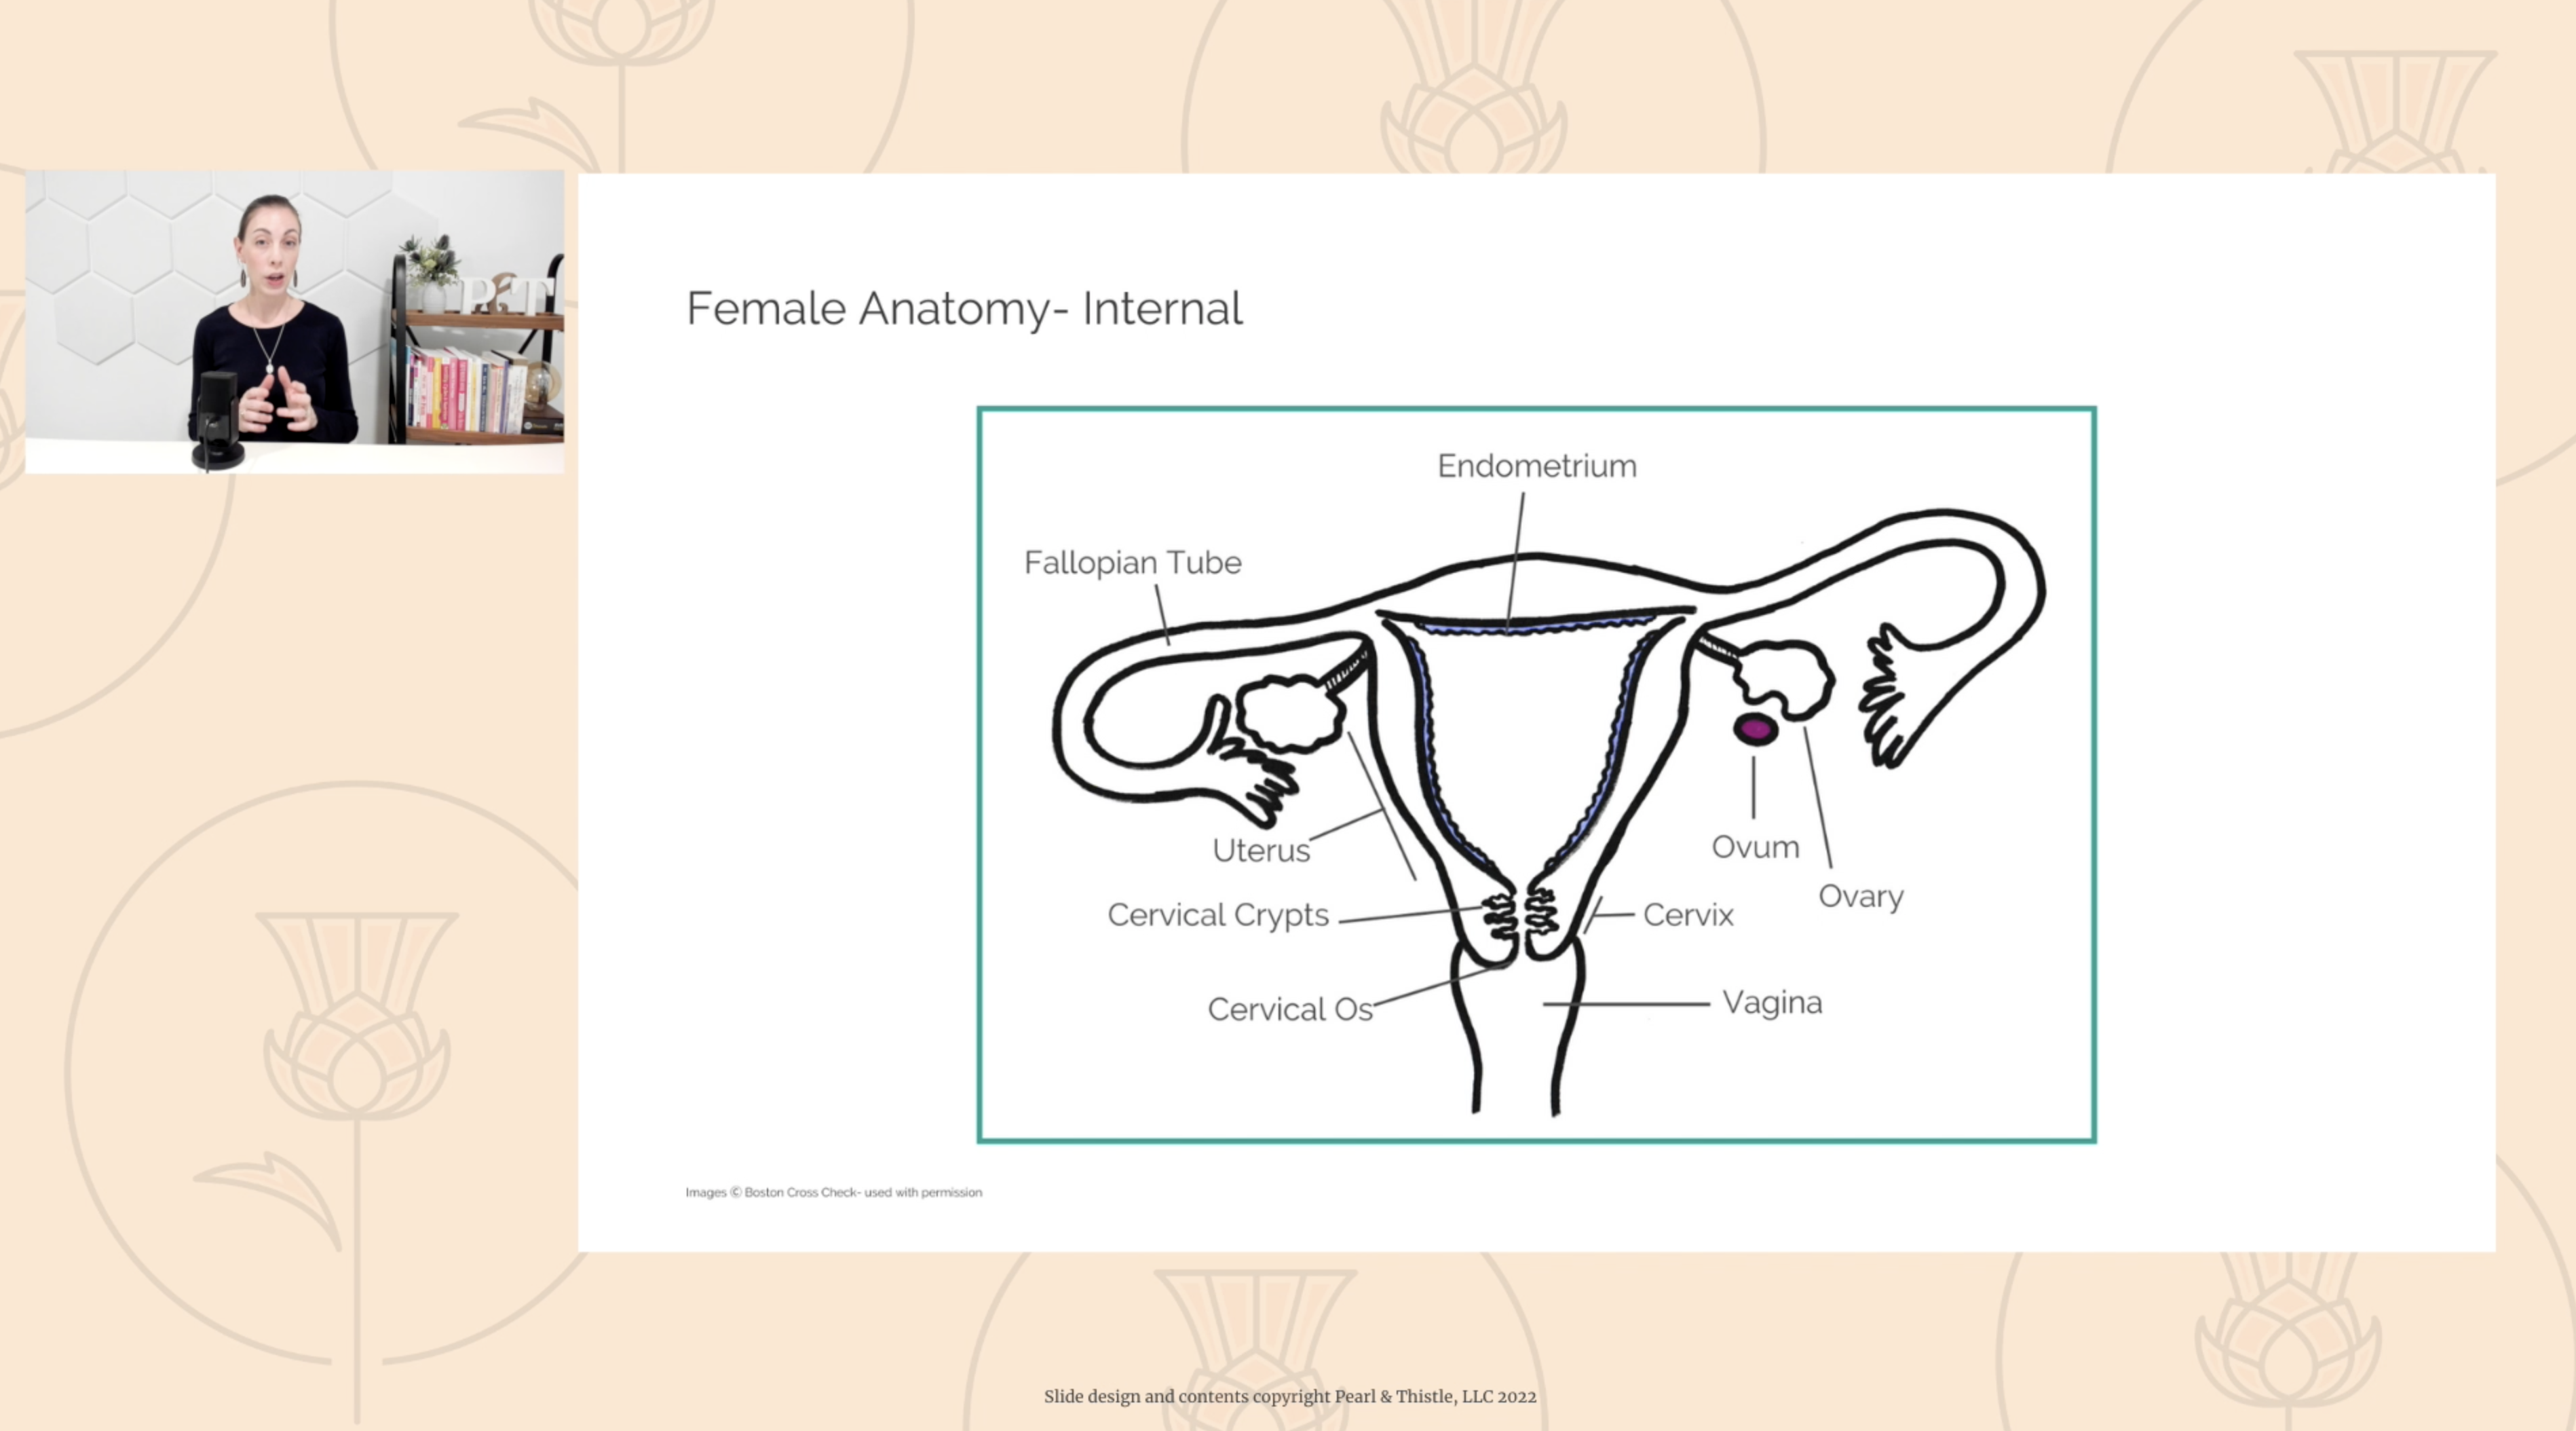 Sample slide from Anatomy, Fertility, & Reproduction course featuring orange background and repeating Pearl and Thistle logo. A woman talks in one corner of the screen while a graphic of female internal anatomy is shown.